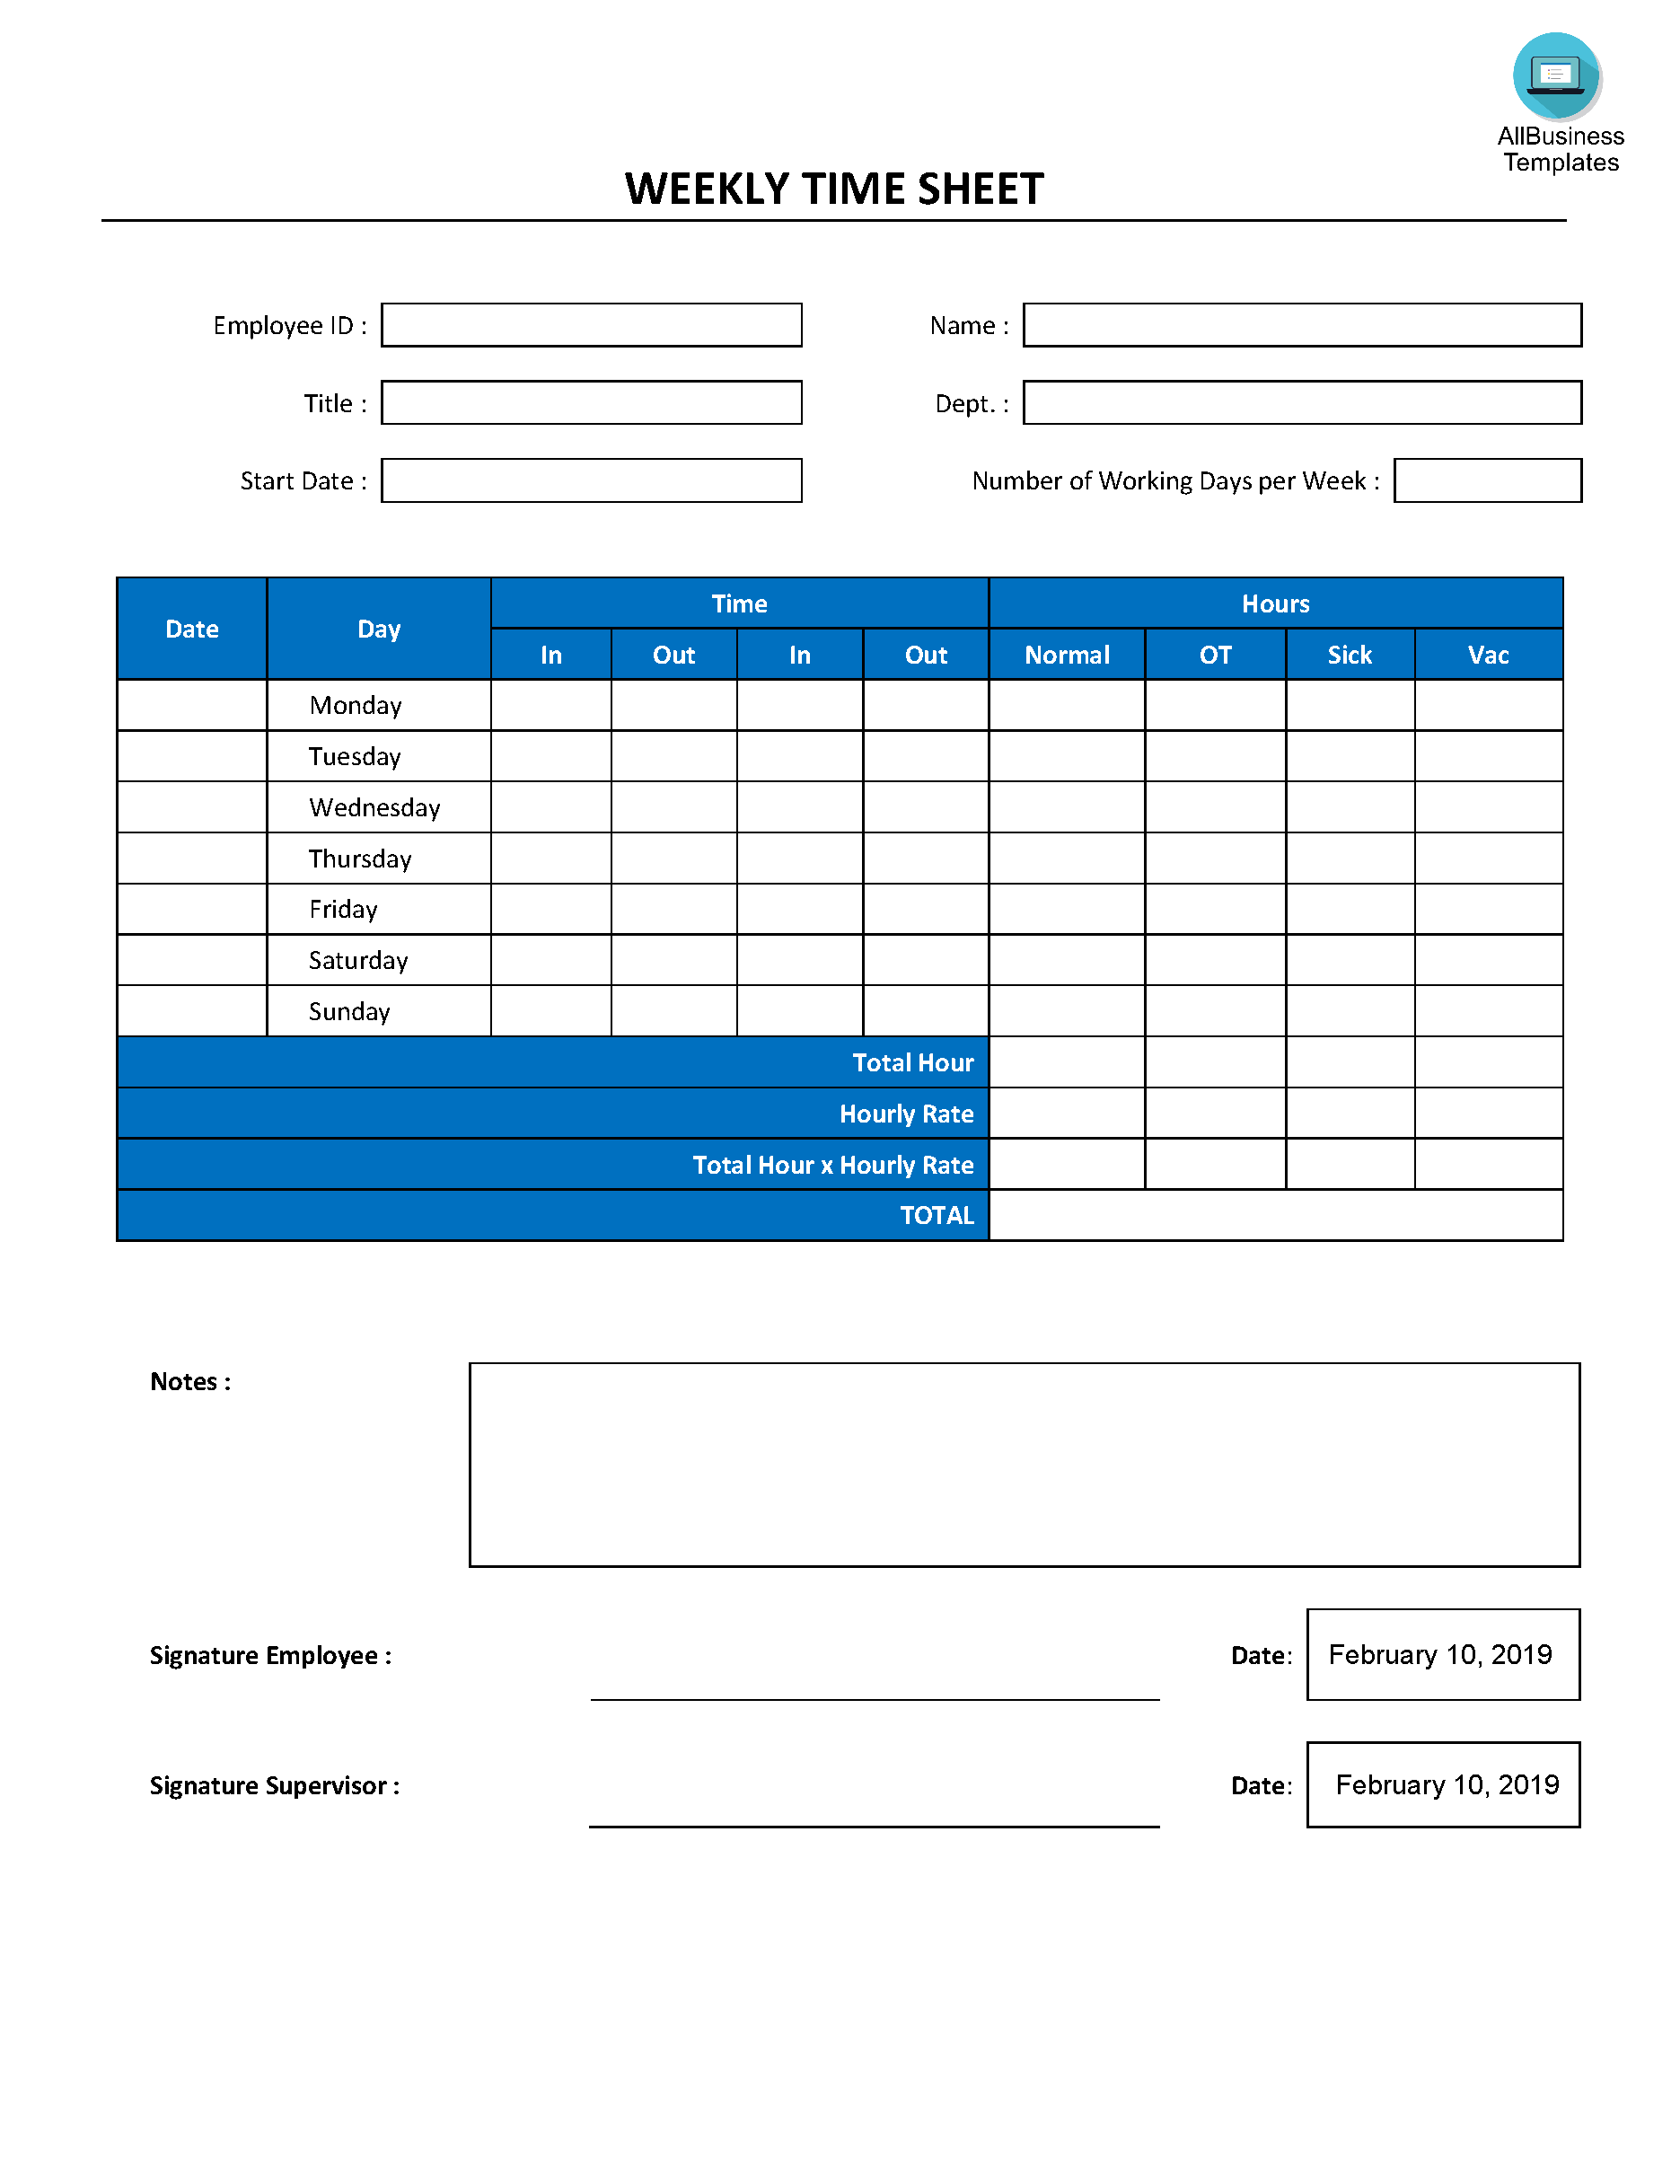 Weekly Time Sheet Registration Form main image